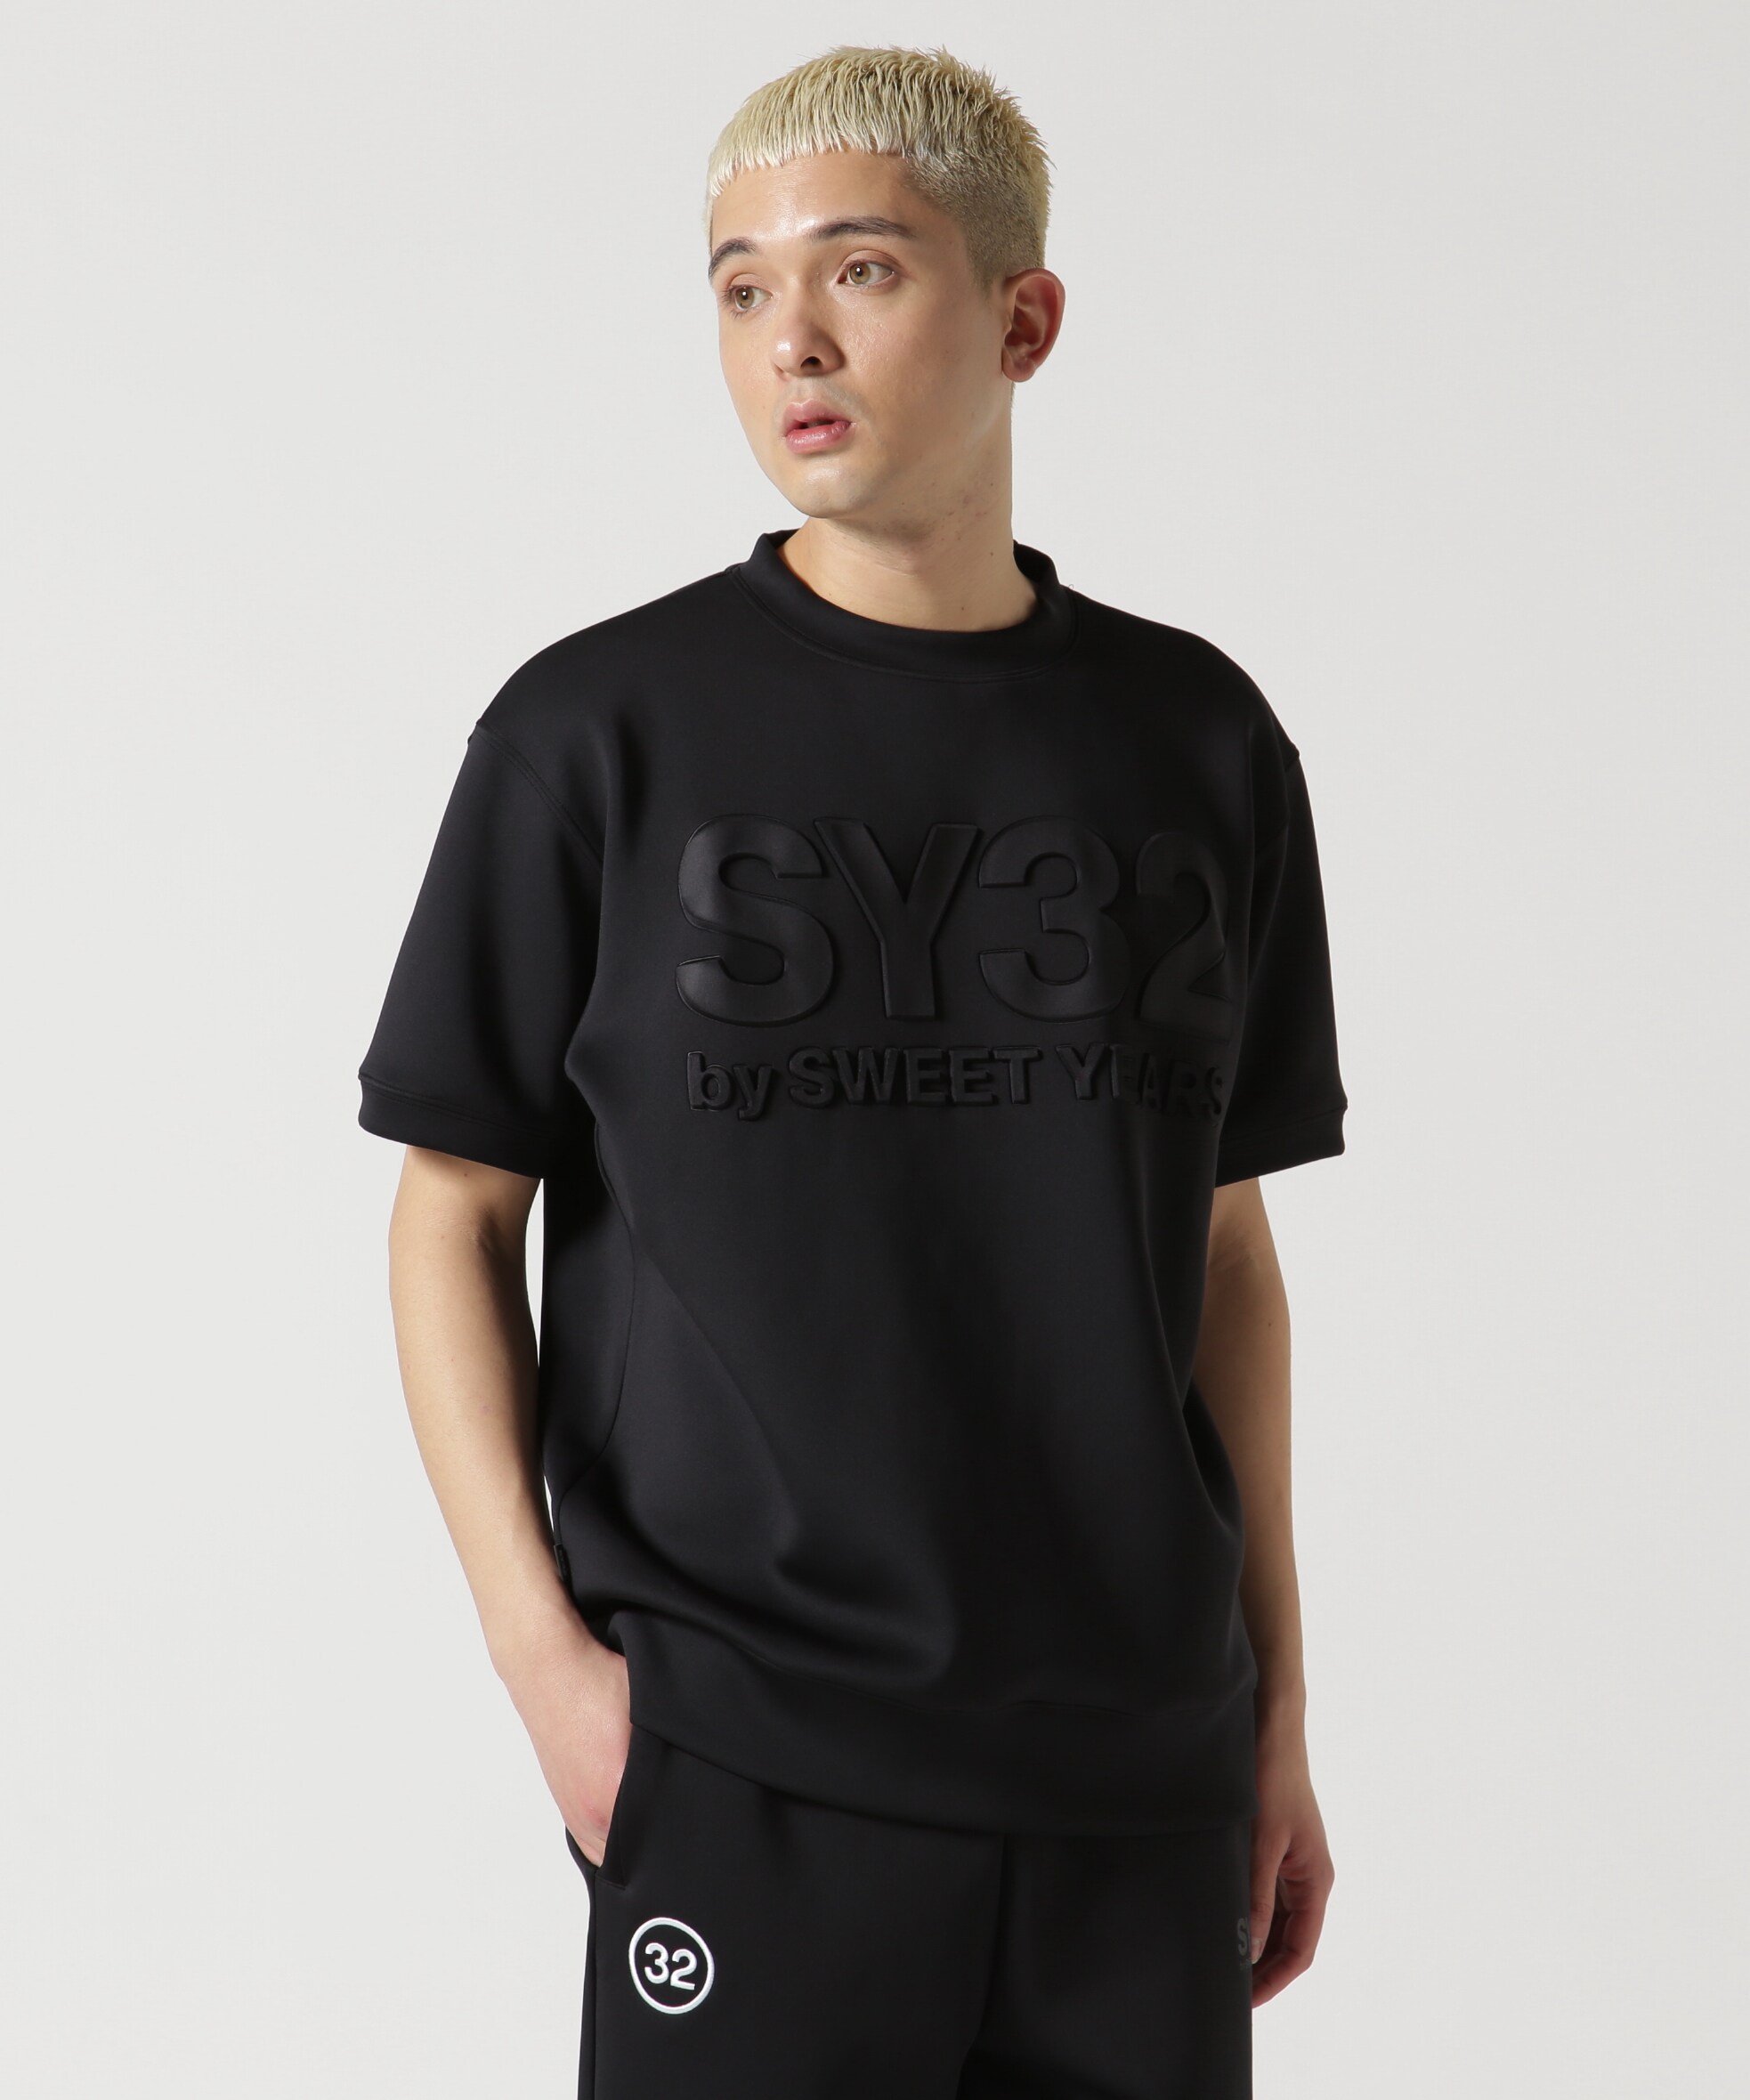 ROYAL FLASH SY32 by SWEET YEARS/DOUBLE KNIT EMBOSS LOGO TEE ロイヤルフラッシュ トップス カットソー・Tシャツ ブラック ホワイト【送料無料】